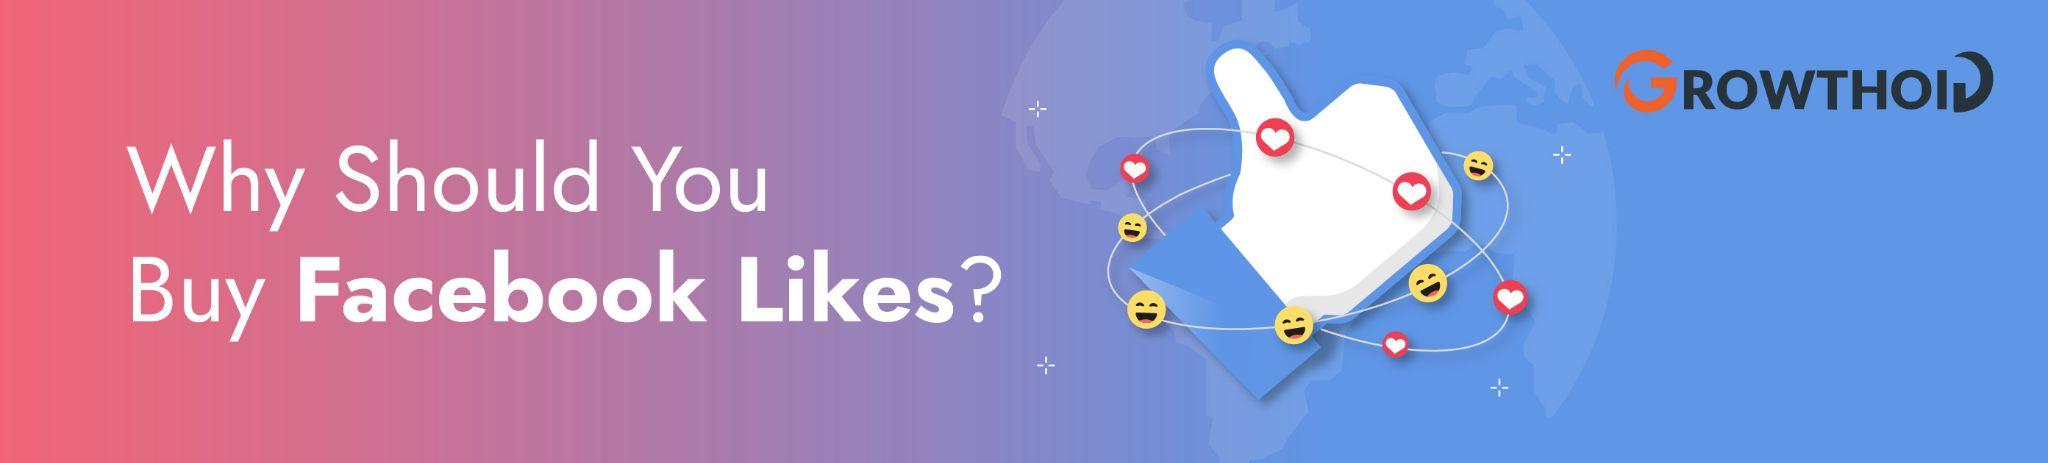 Why Should You Buy Facebook Likes?